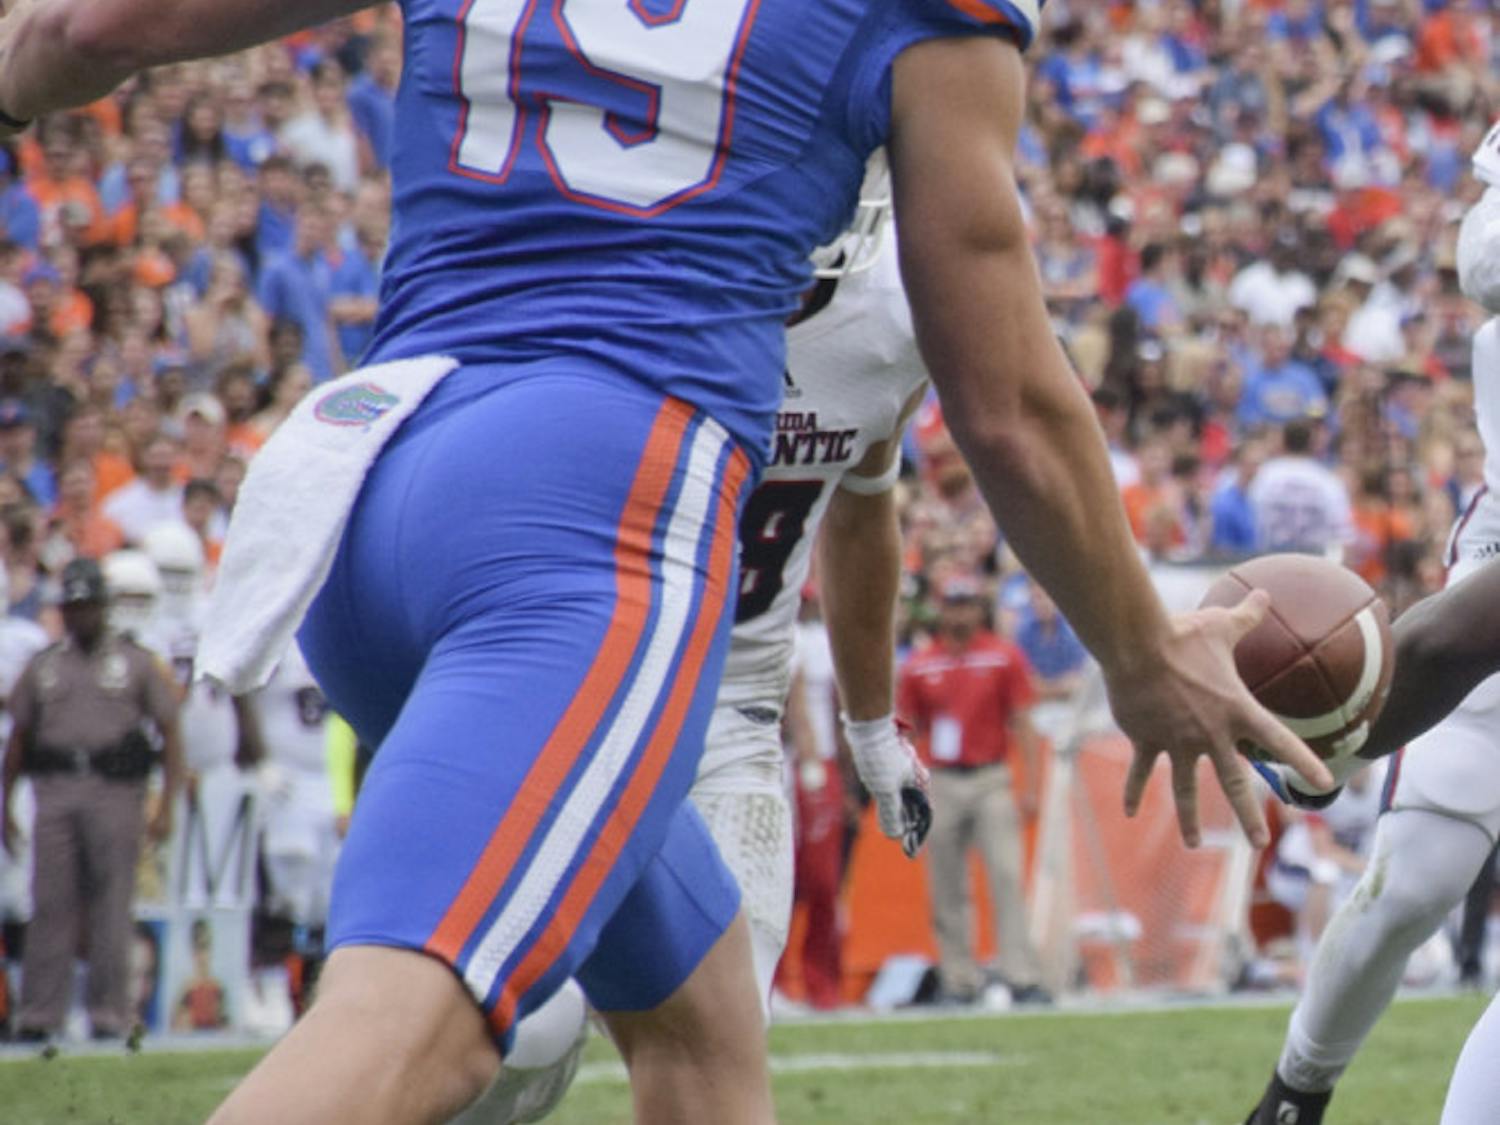 Johnny Townsend punts during Florida's 20-14 overtime win against Florida Atlantic on Nov. 21, 2015, at Ben Hill Griffin Stadium.